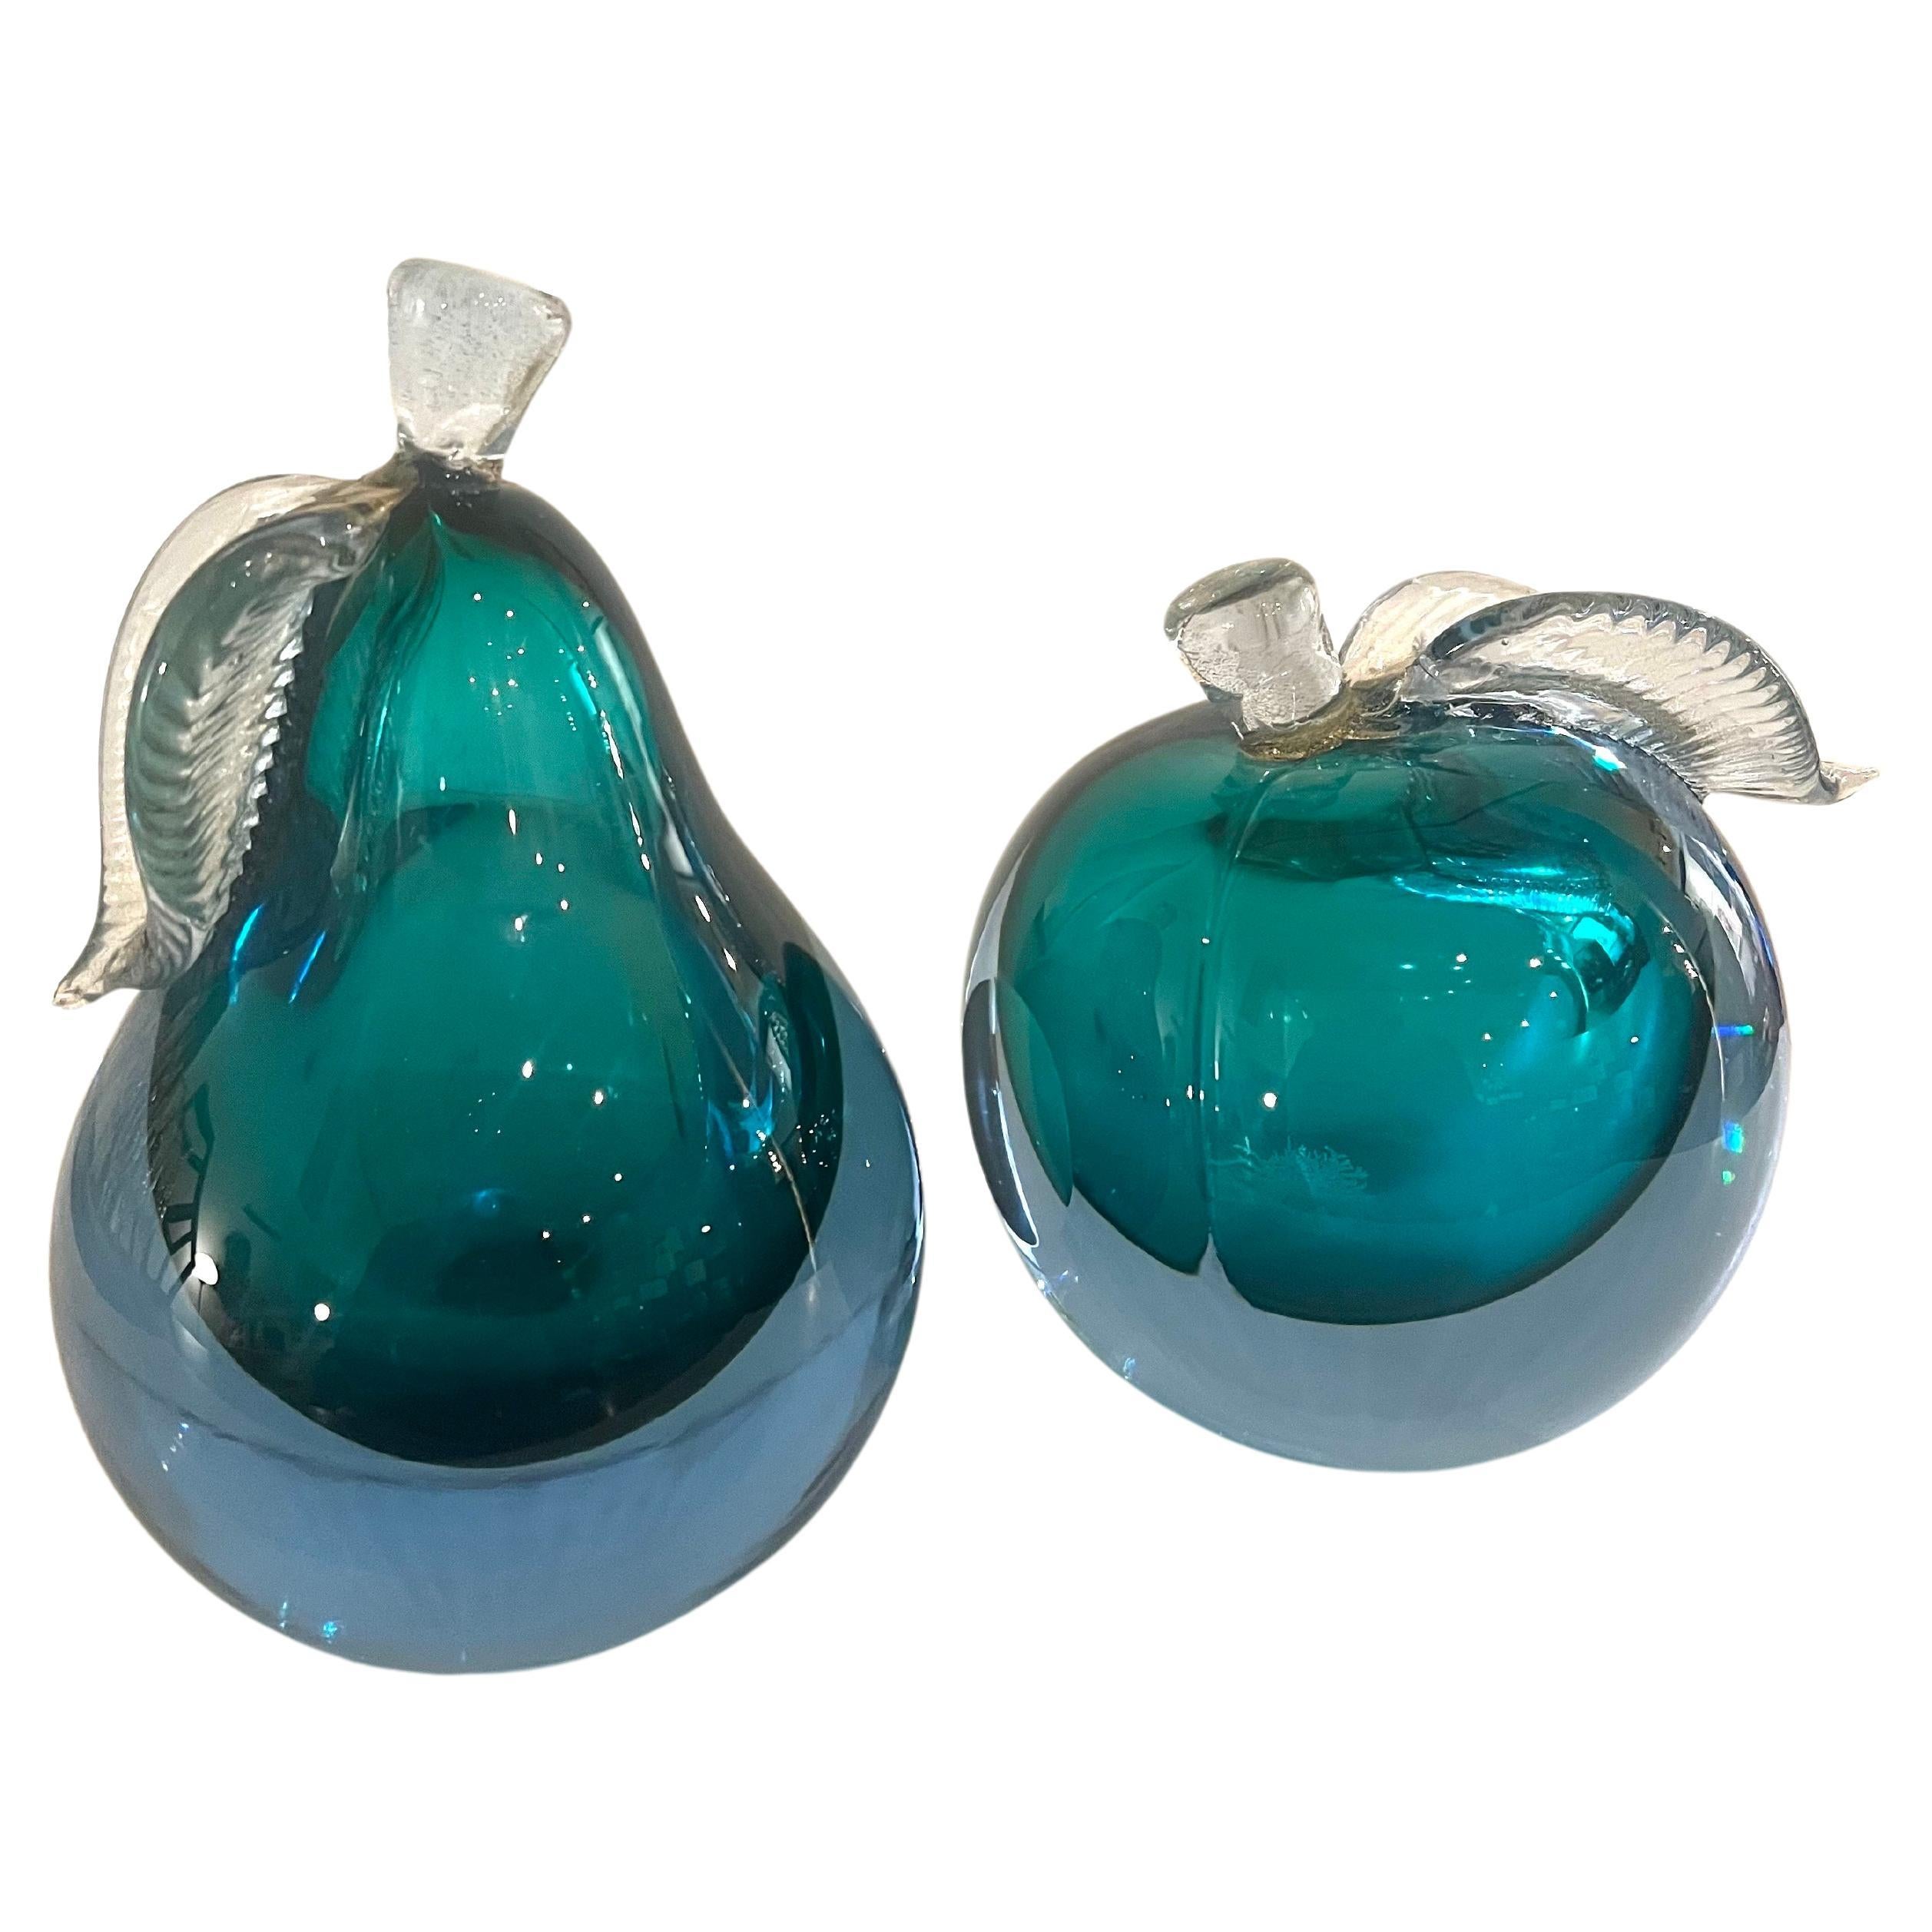 Livio Seguso Venetian Murano Italy Art Glass Apple and Pear Bookends Sculptures For Sale